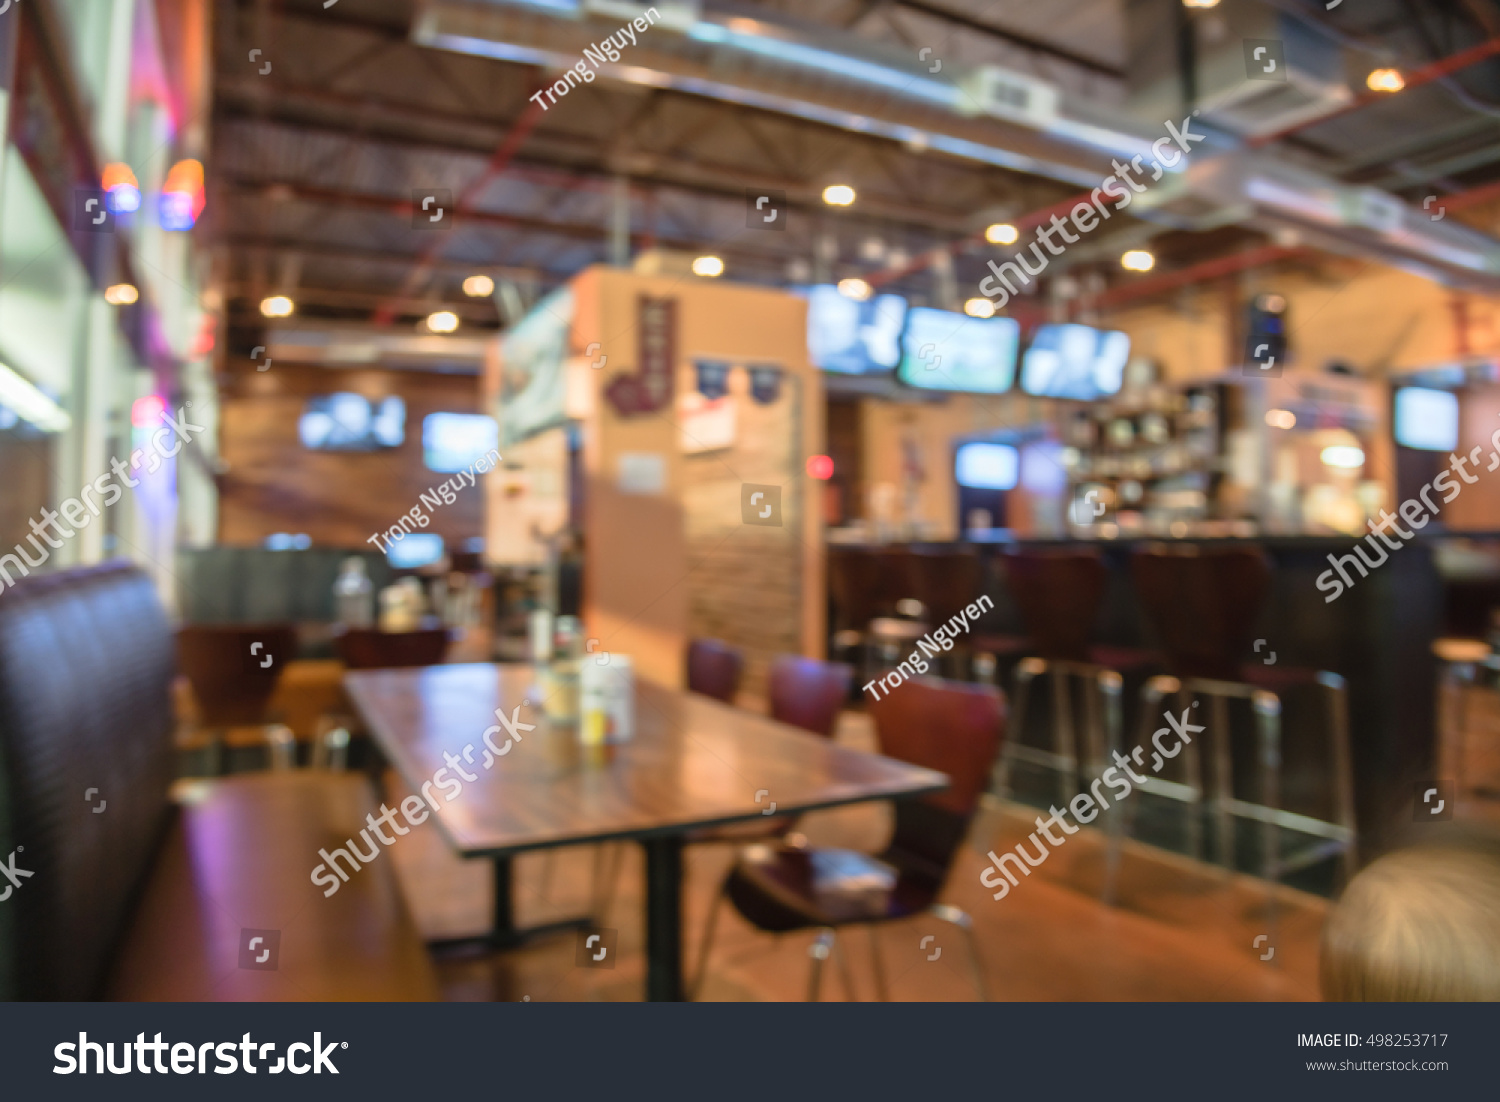 Blurred Image Sport Oyster Bar Tv Stock Photo Edit Now 498253717